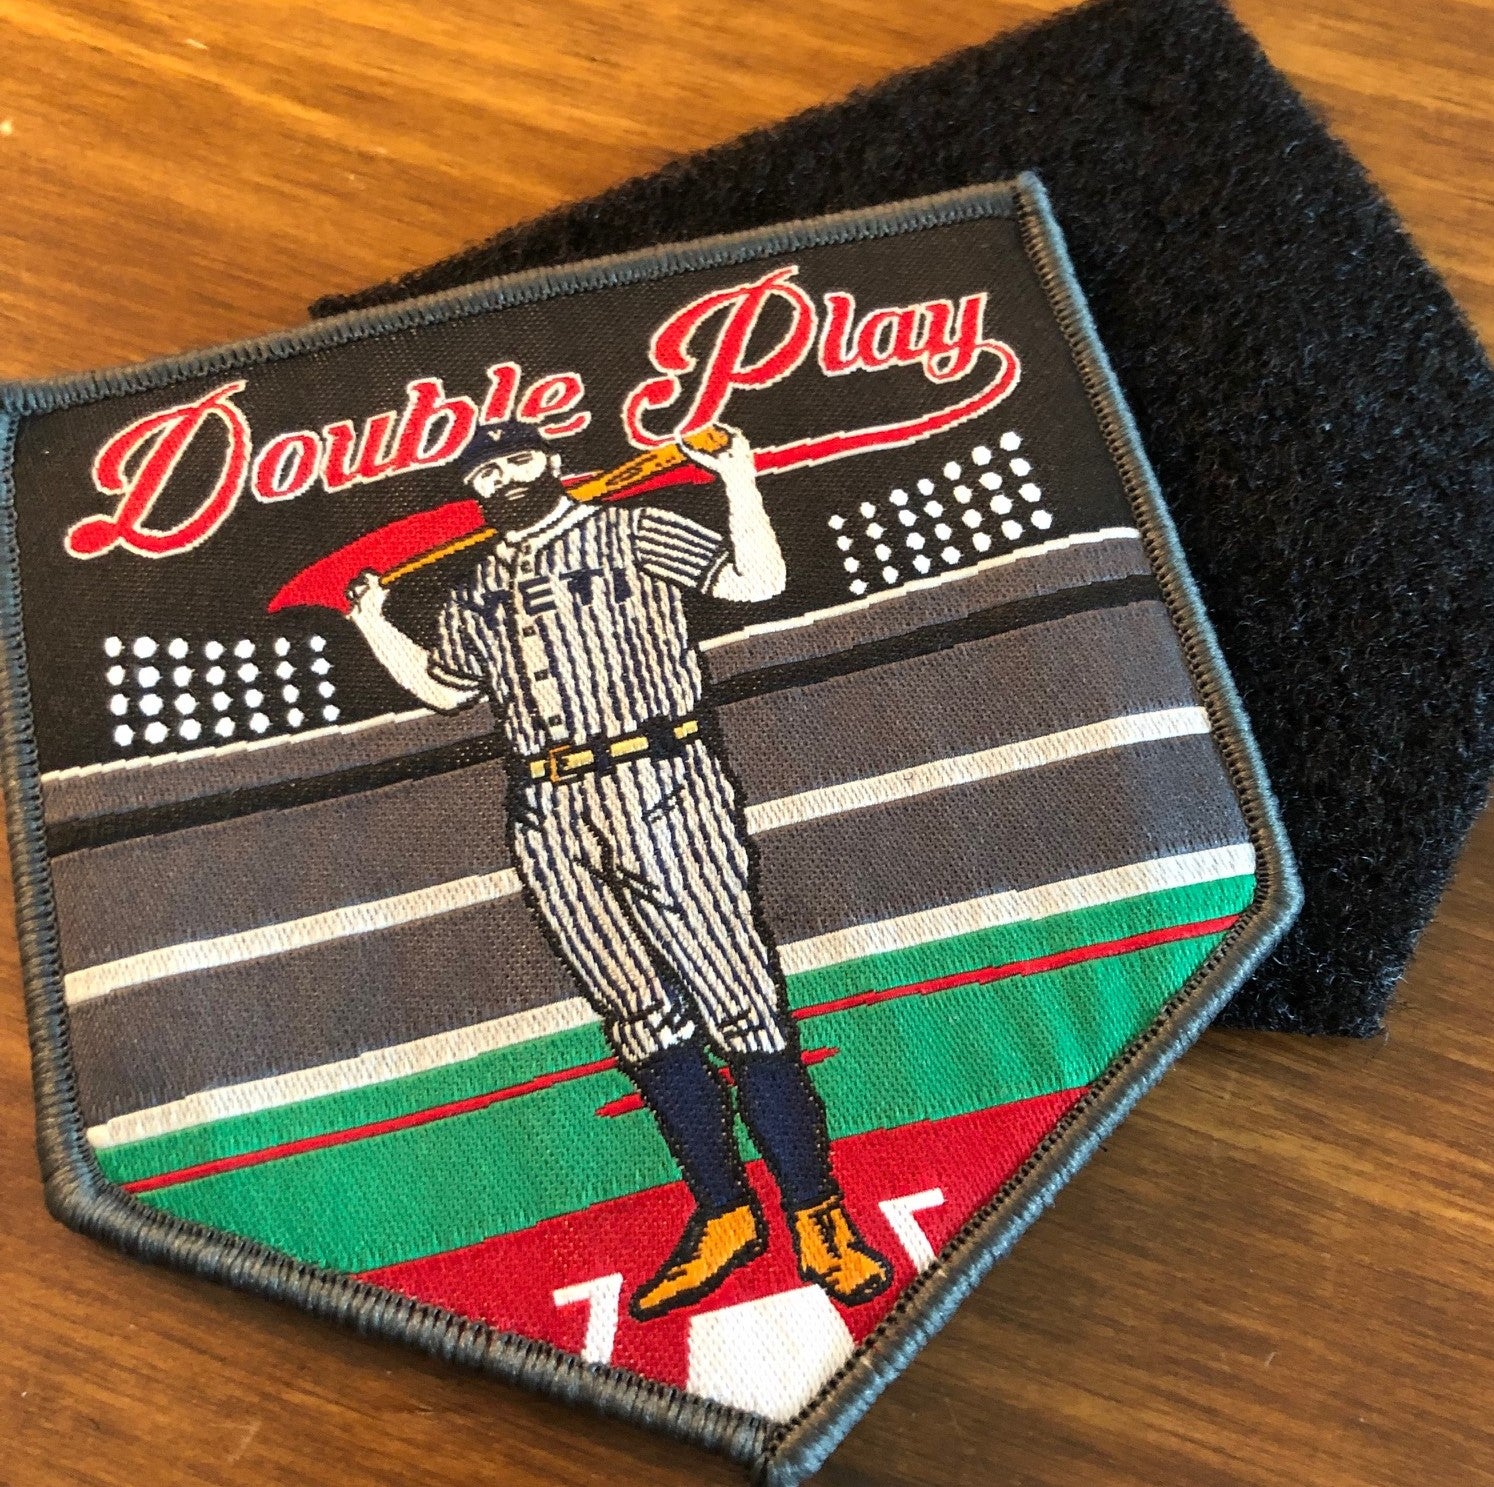 Woven Patches VELCRO®Brand backed – Couture Label Company